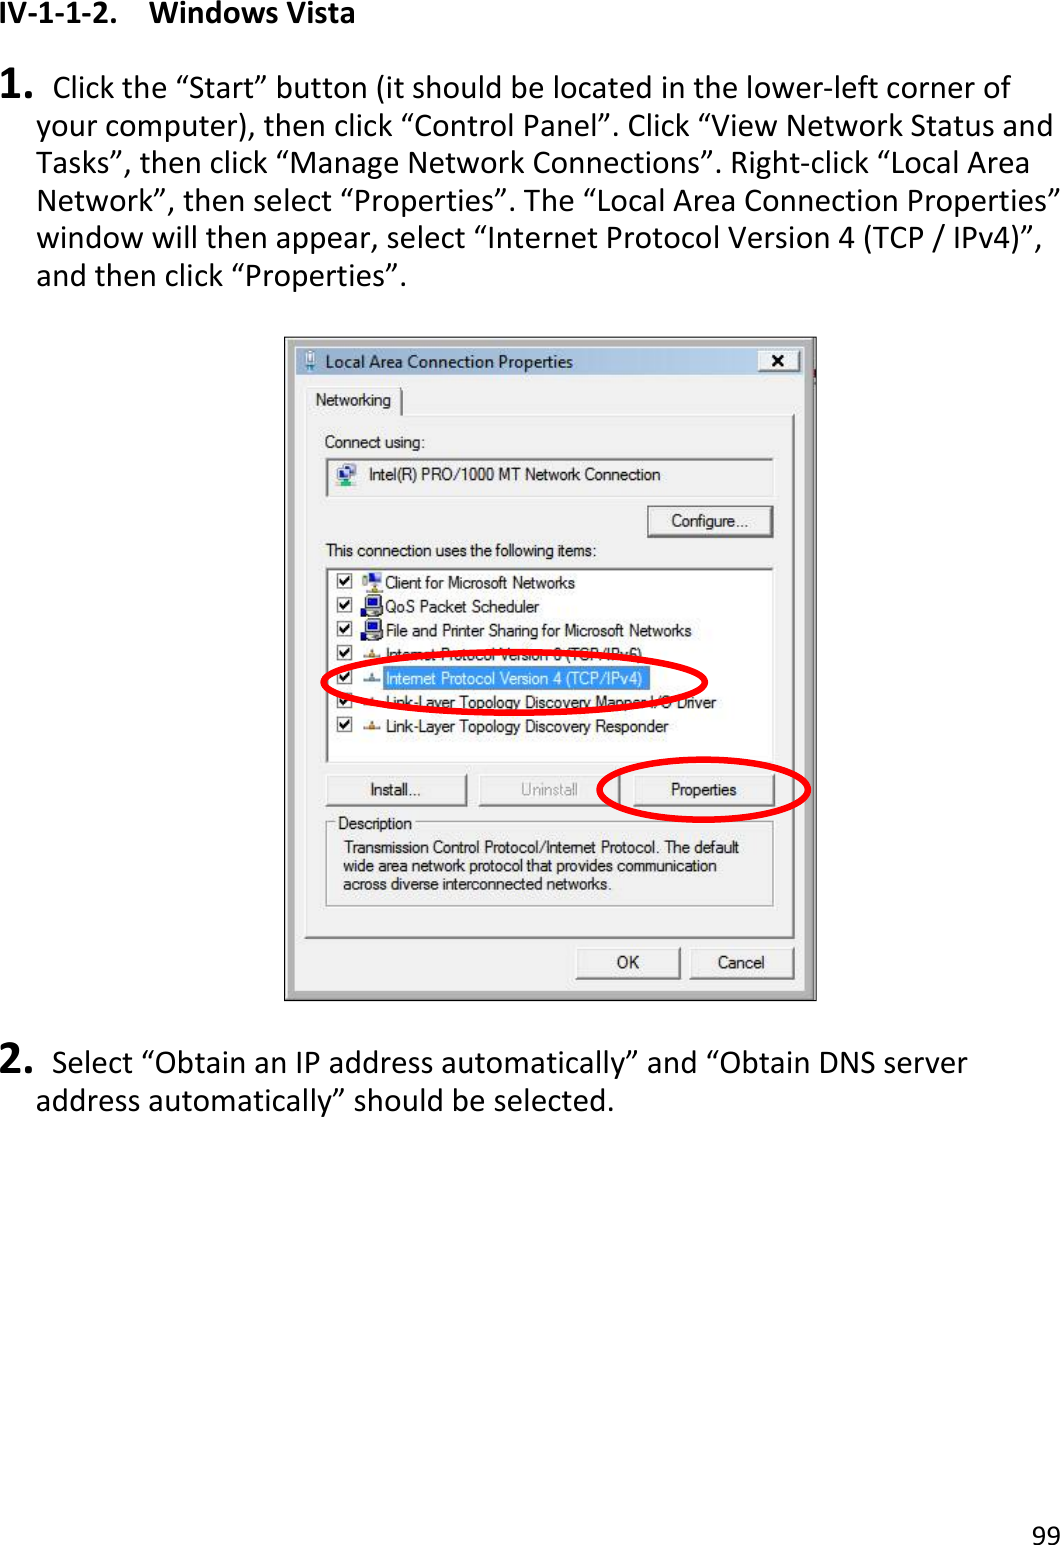 99  IV-1-1-2.  Windows Vista  1.   Click the “Start” button (it should be located in the lower-left corner of your computer), then click “Control Panel”. Click “View Network Status and Tasks”, then click “Manage Network Connections”. Right-click “Local Area Network”, then select “Properties”. The “Local Area Connection Properties” window will then appear, select “Internet Protocol Version 4 (TCP / IPv4)”, and then click “Properties”.    2.   Select “Obtain an IP address automatically” and “Obtain DNS server address automatically” should be selected. 